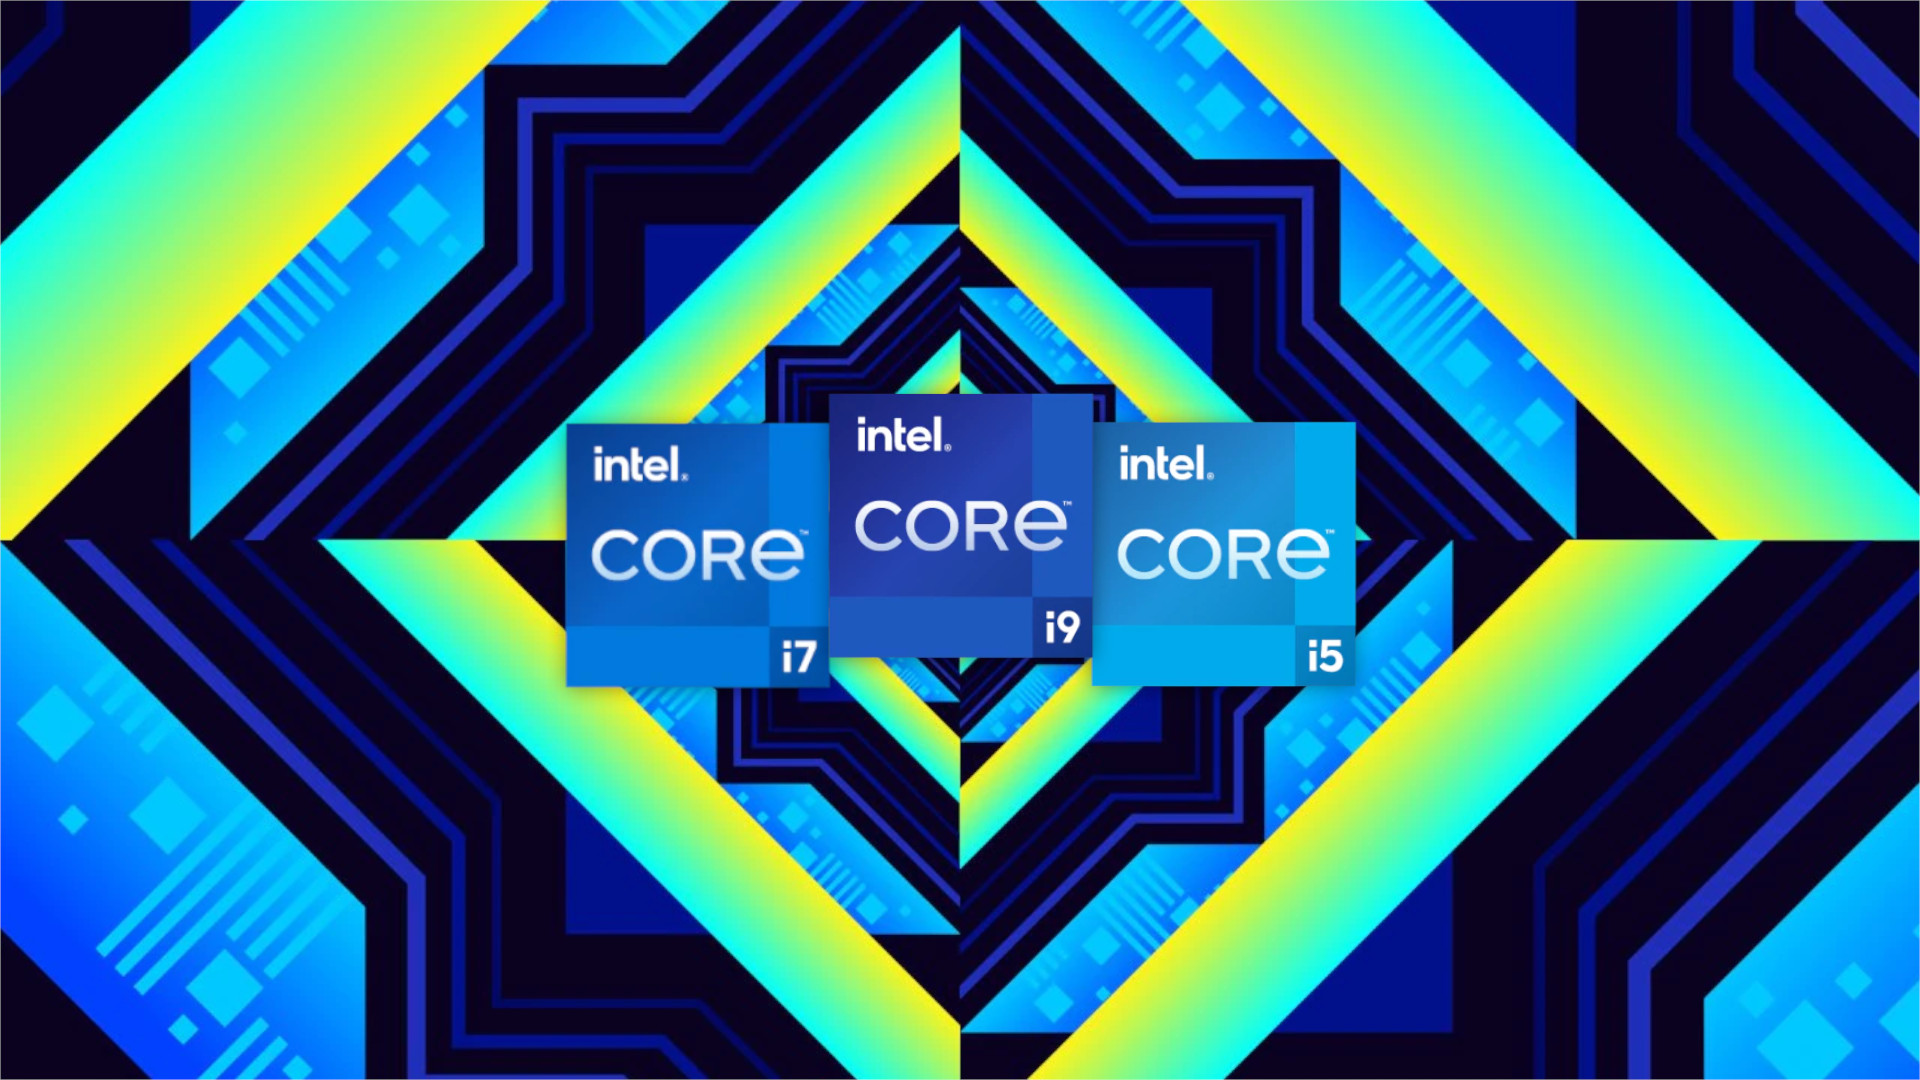 Hexa-core CPUs now dominate Steam as Intel 12th gen grows